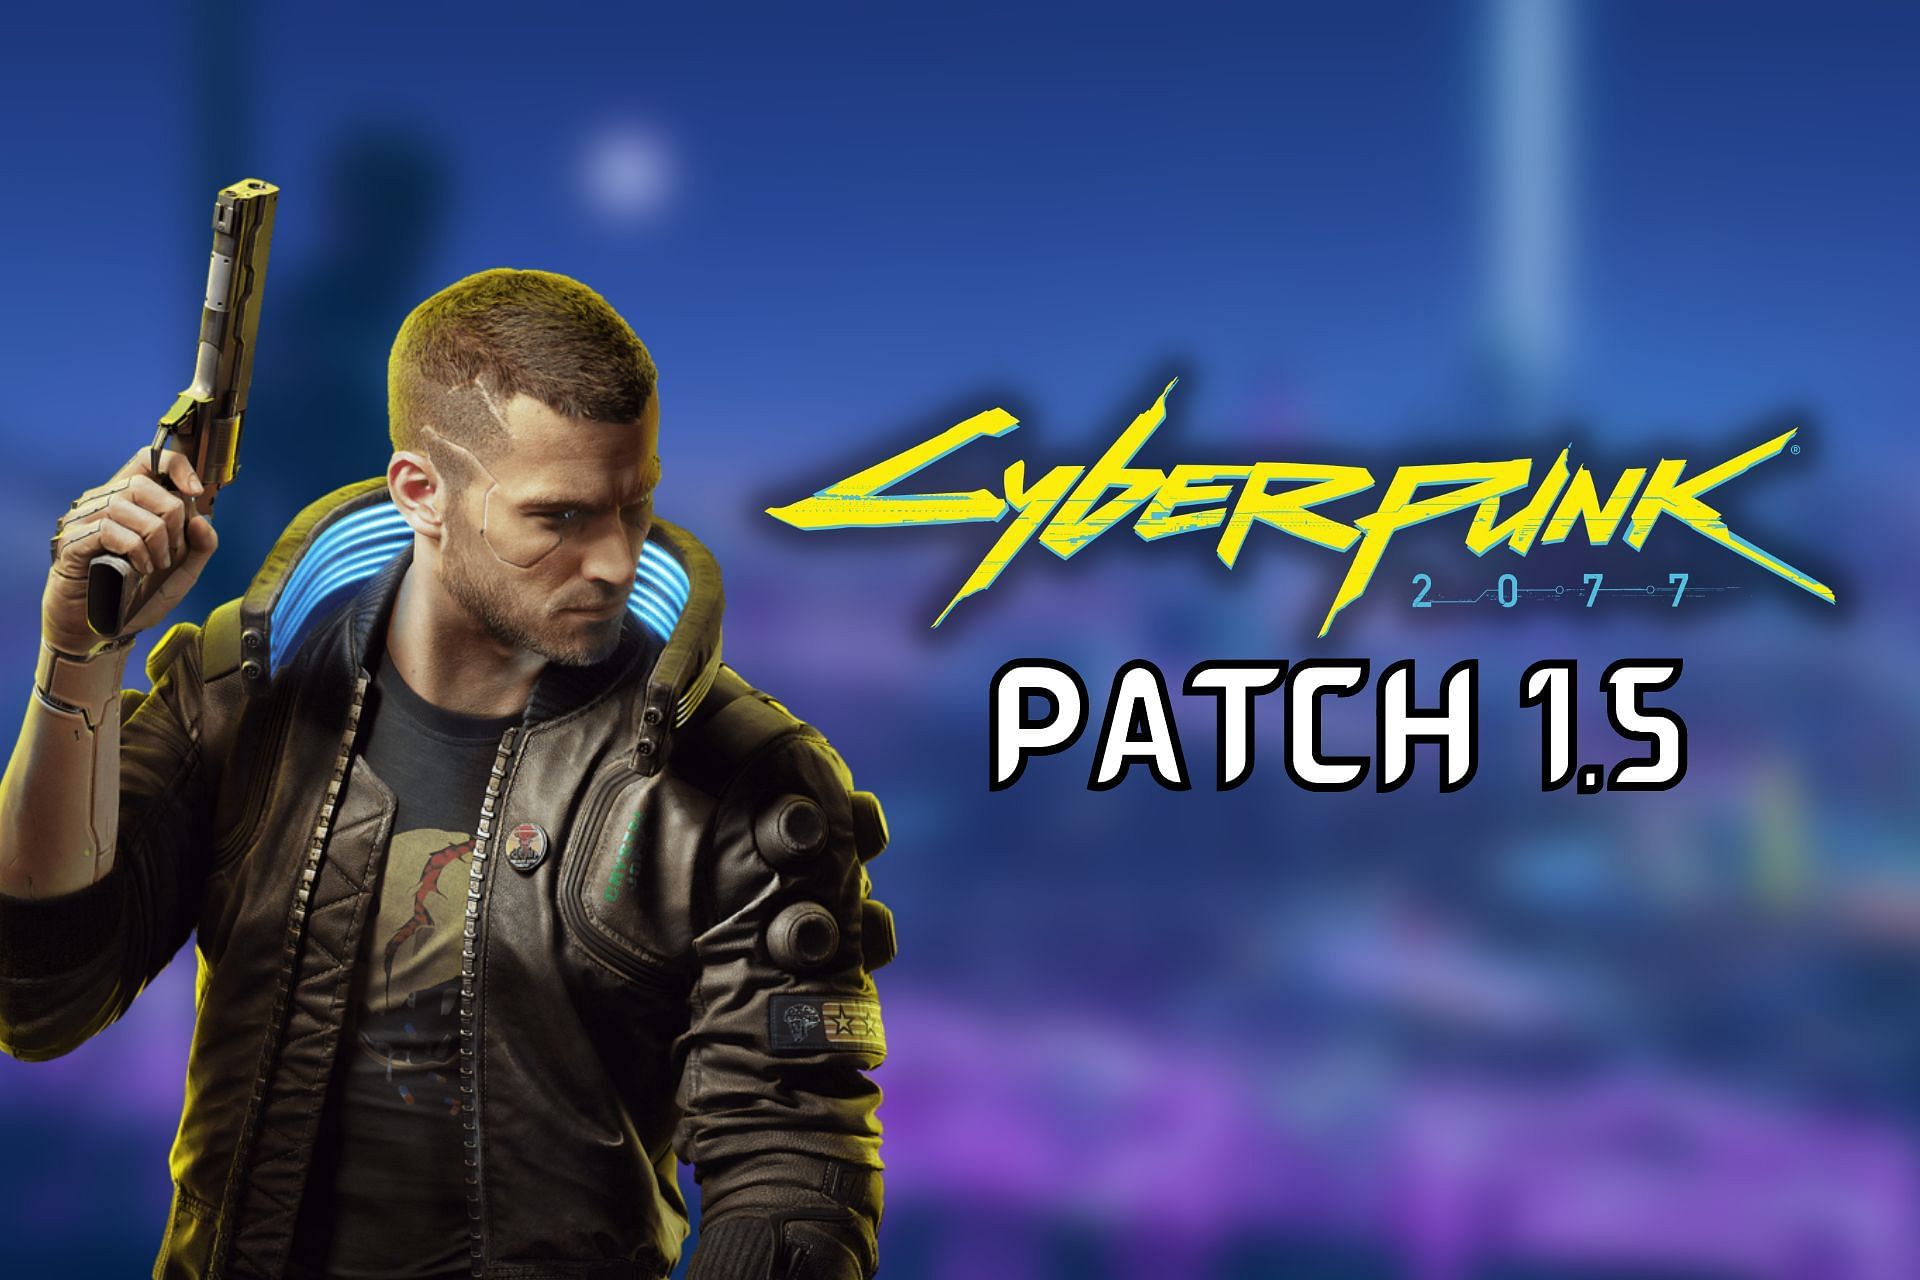 Patch 1.5 for Cyberpunk 2077 is now out for players to enjoy (Image via CD Projekt RED)